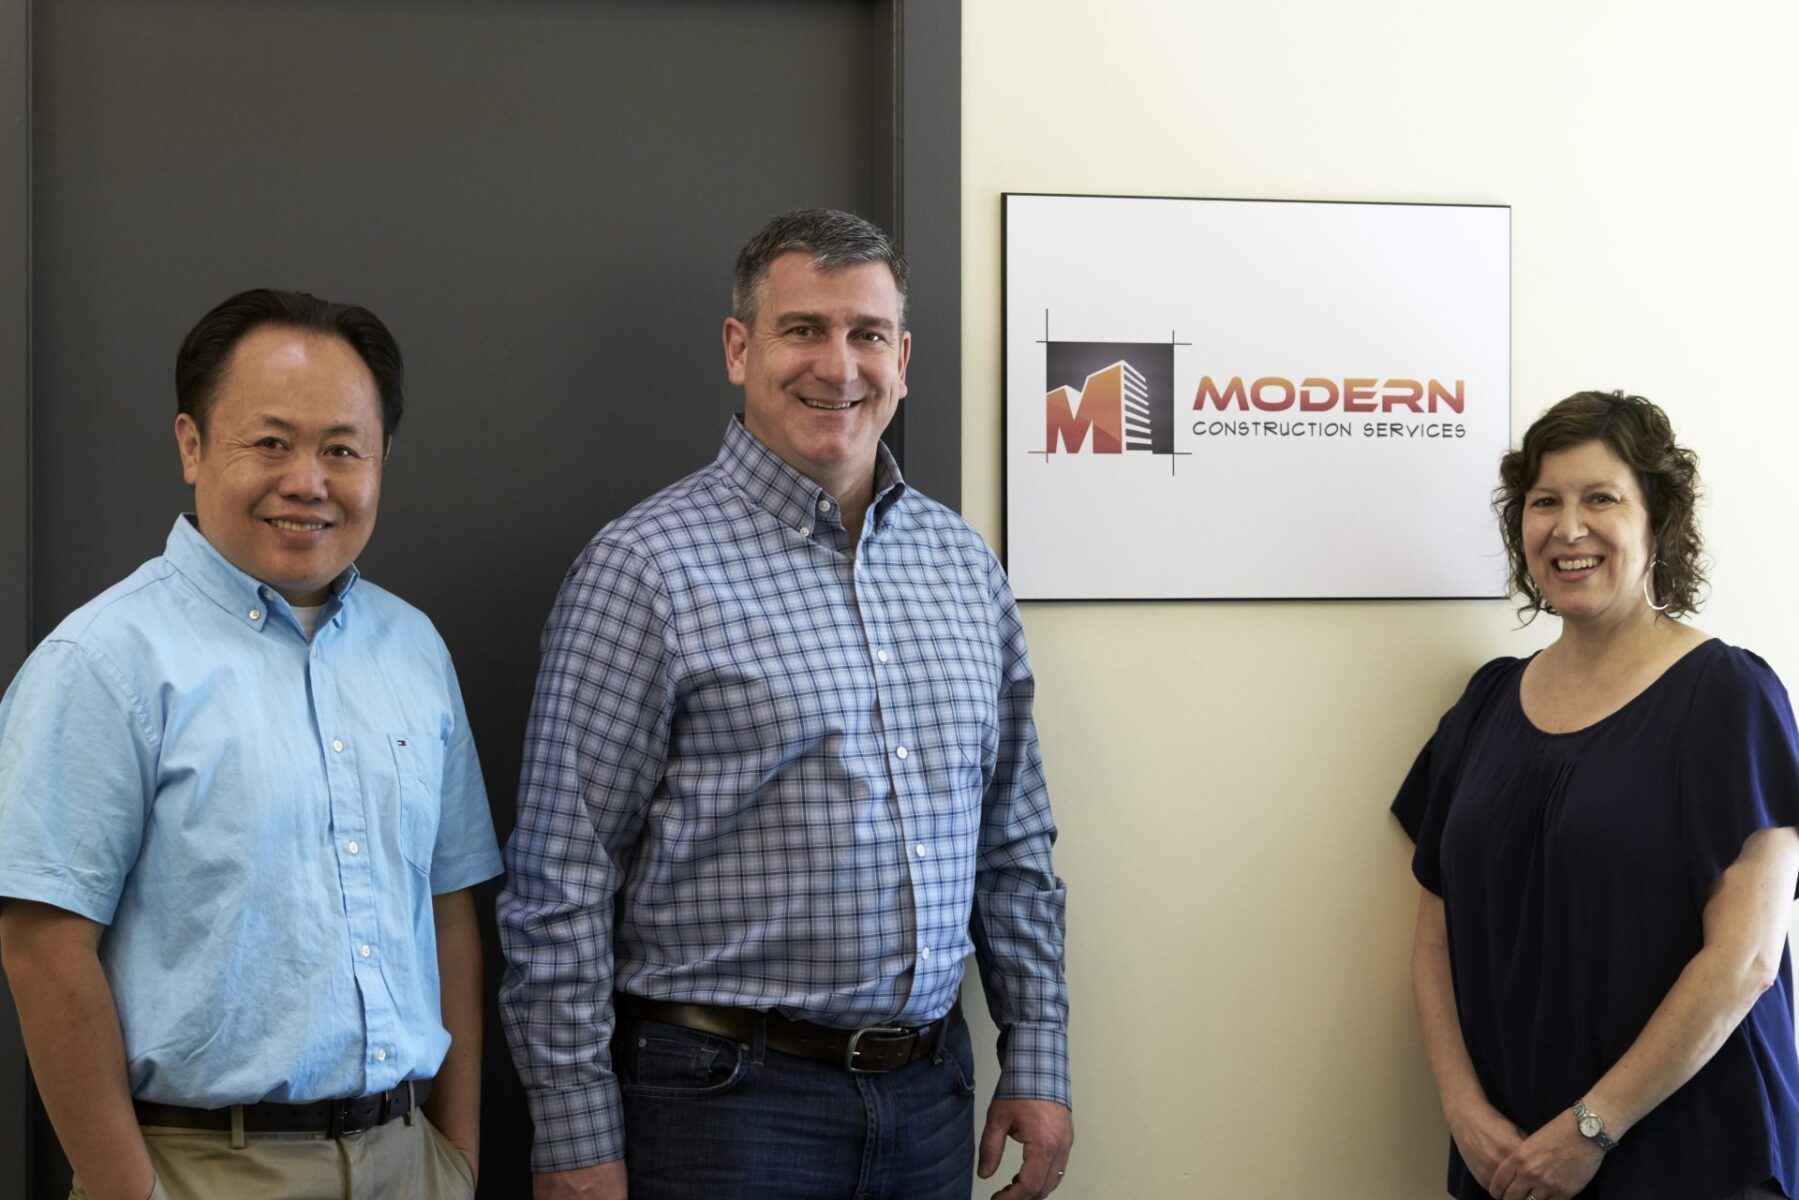 Modern Construction Services leadership team includes: Sabrina Endres, President; Brett Endres, Vice President /Operations Manager; Khai Xiong, Senior Project Manager